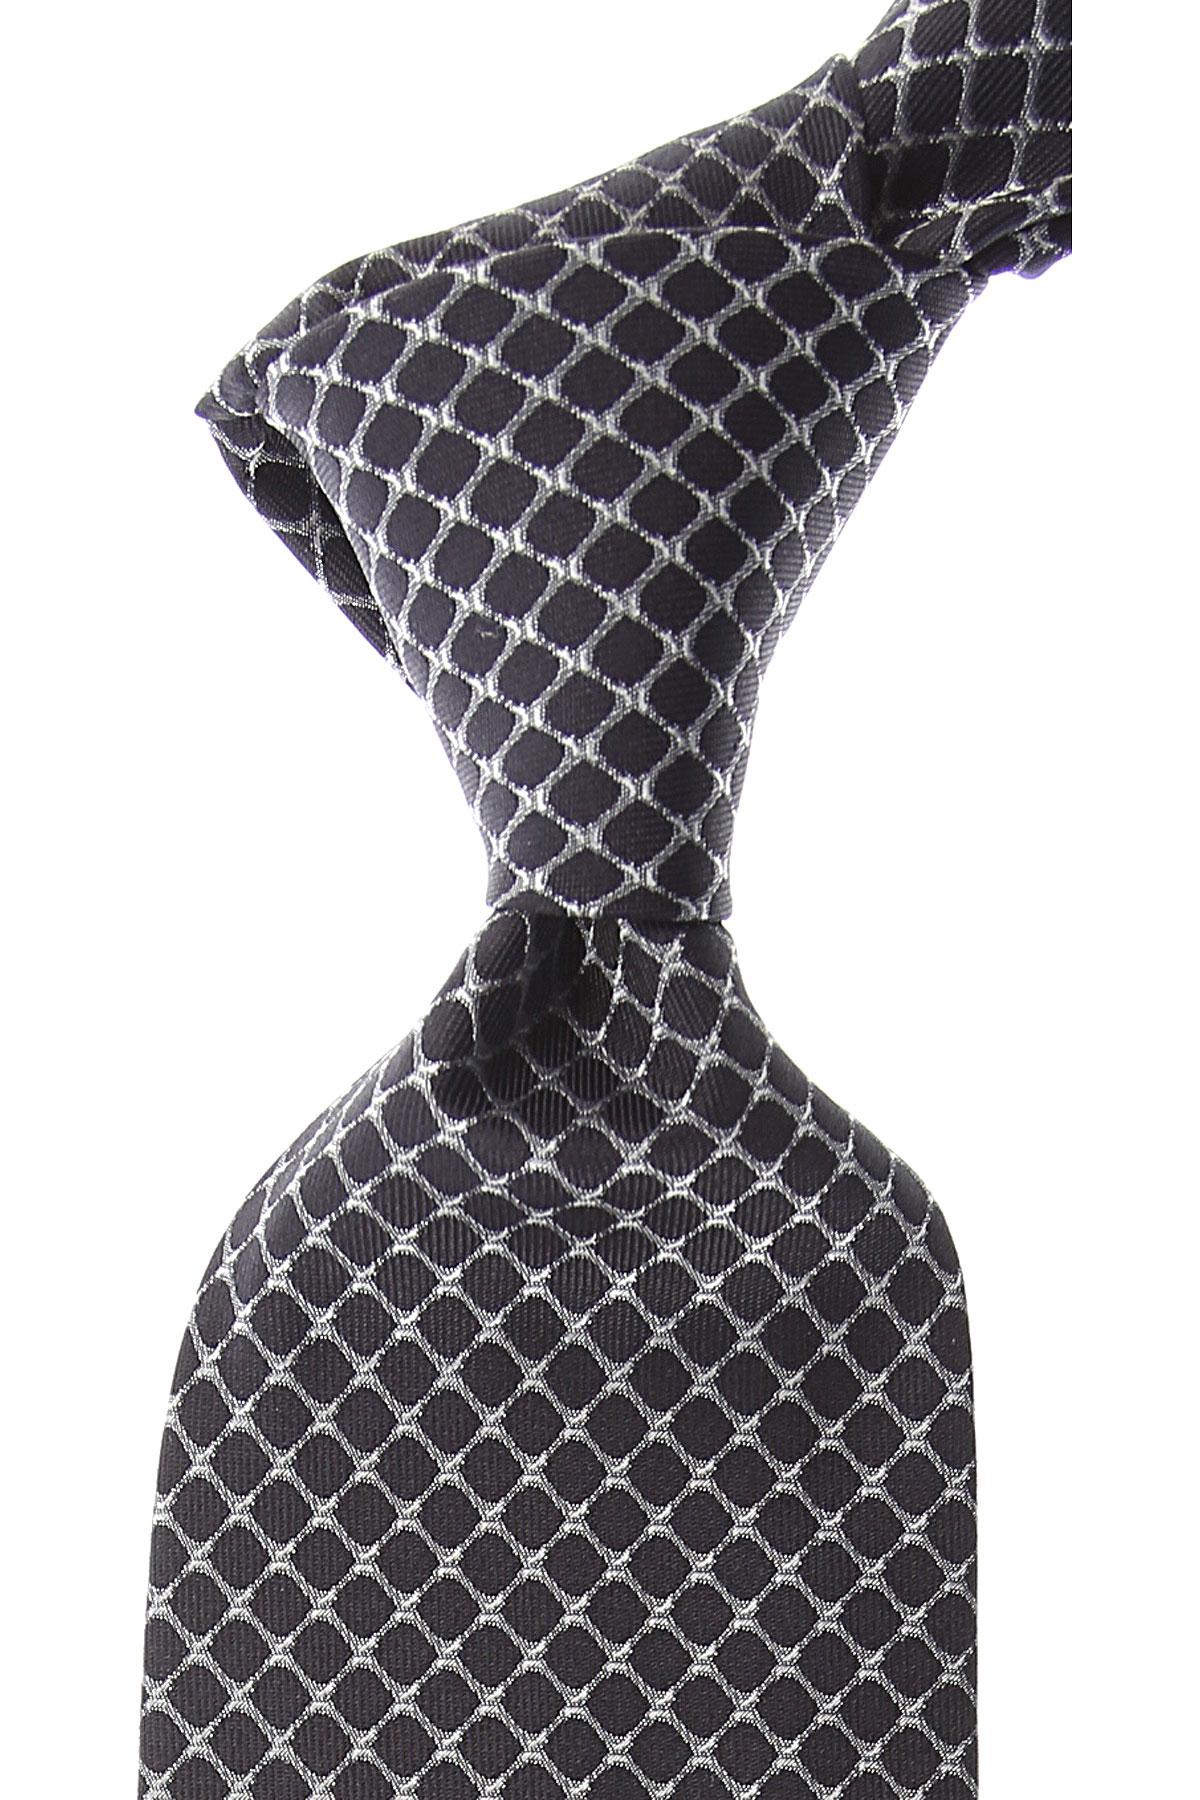 Versace Silk Ties On Sale in Charcoal (Gray) for Men - Lyst